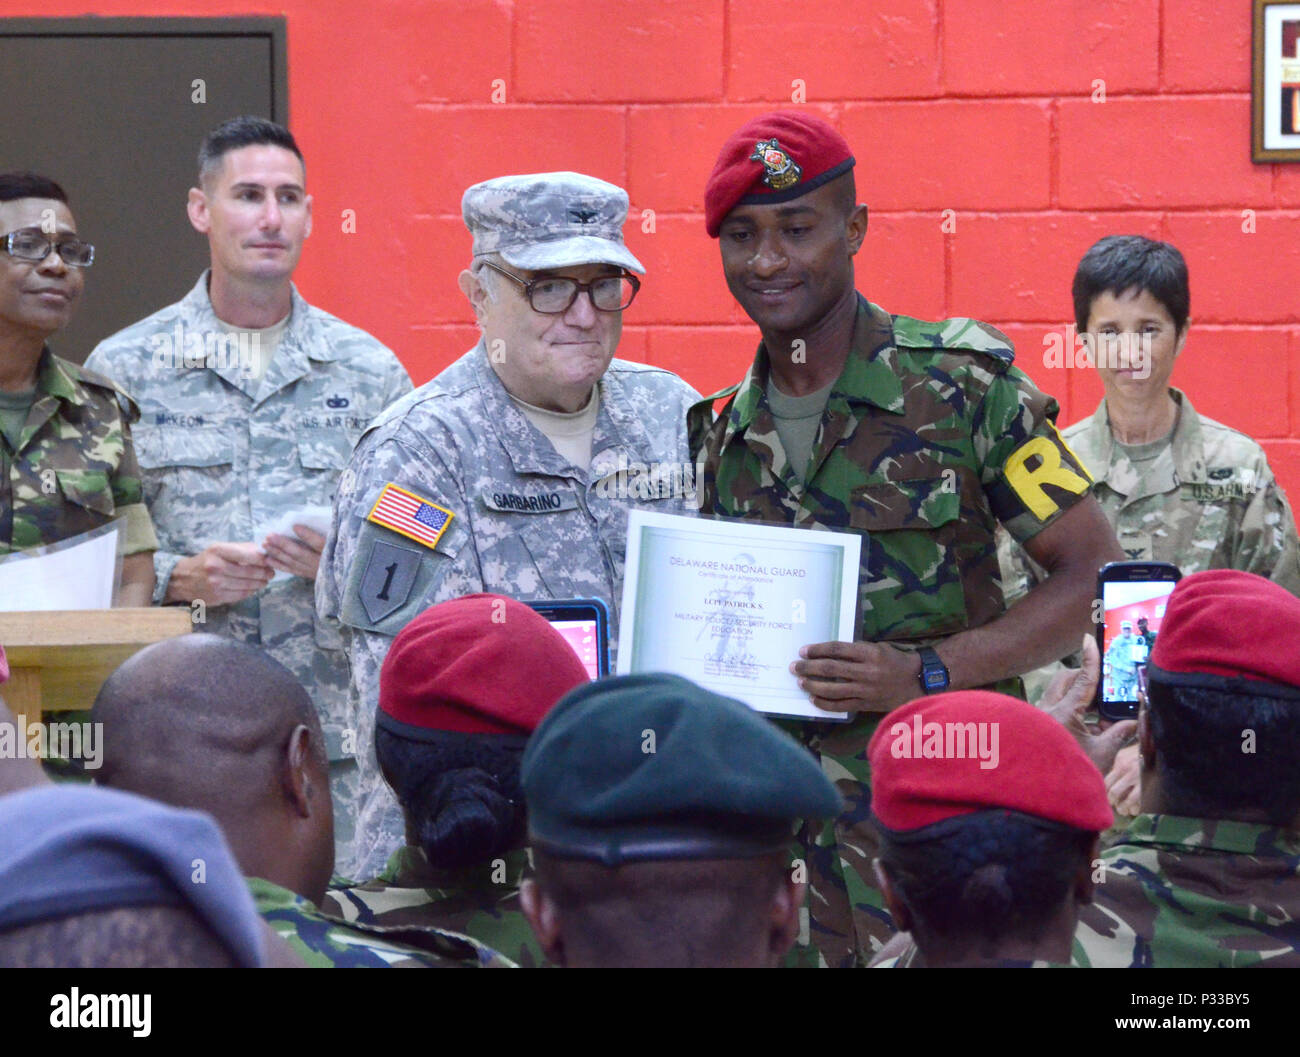 CHAGUARAMAS, Trinidad- Col. Charles L. Garbarinio, medical core, Delaware National Guard, presents Lance Corporal Patrick S. with an award prior to receiving his award during an award ceremony held on Aug. 11, 2016. ( U.S. Air National Guard photo by Tech. Sgt. Gwendolyn Blakley) Stock Photo